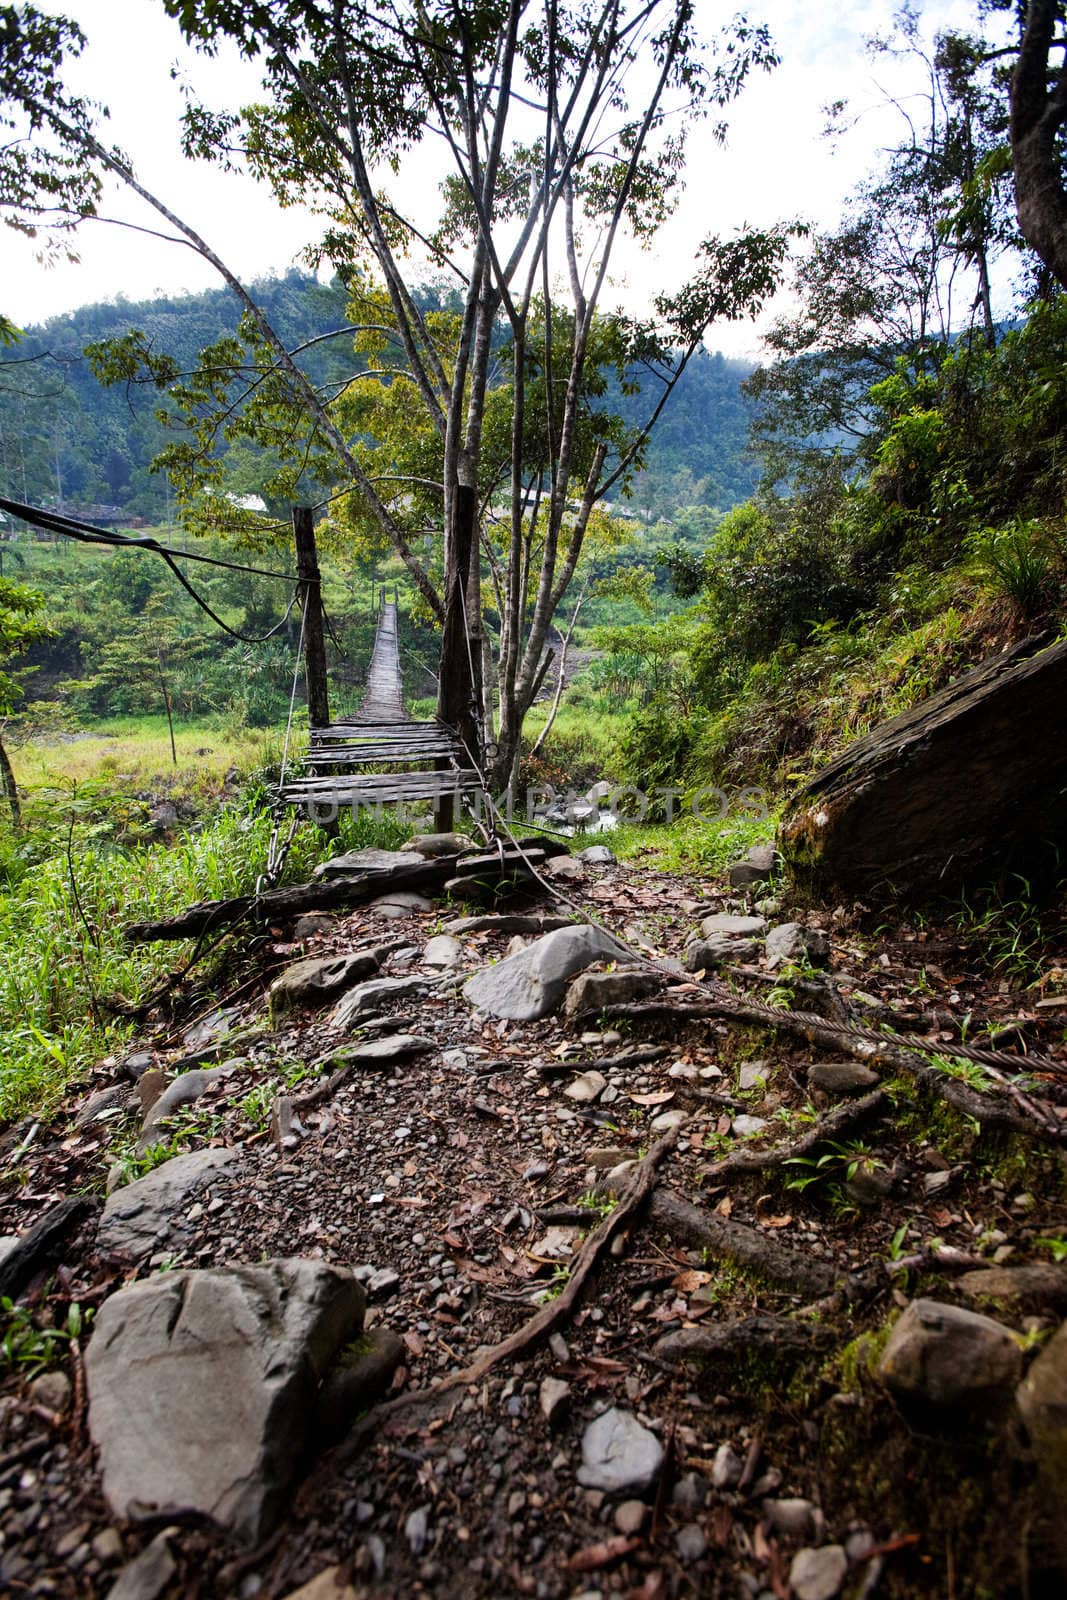 A scary hanging bridge in a tropical landscape